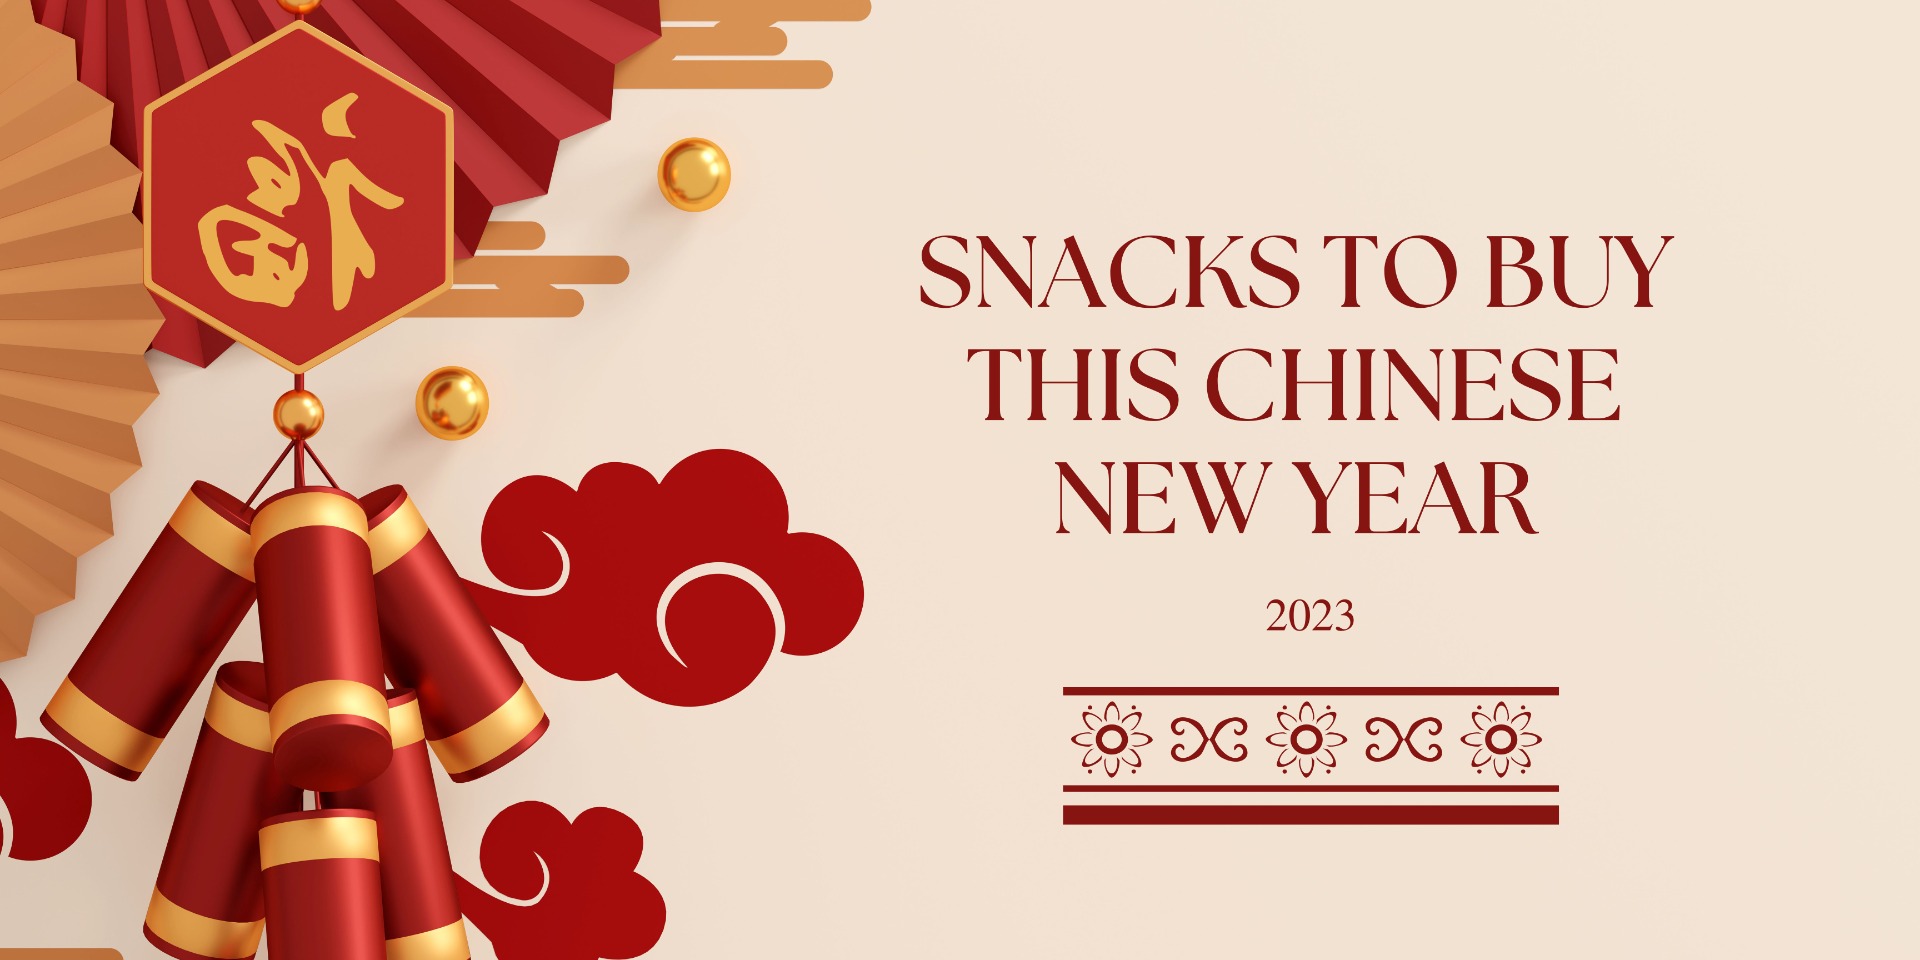 Snacks to Buy During Chinese New Year